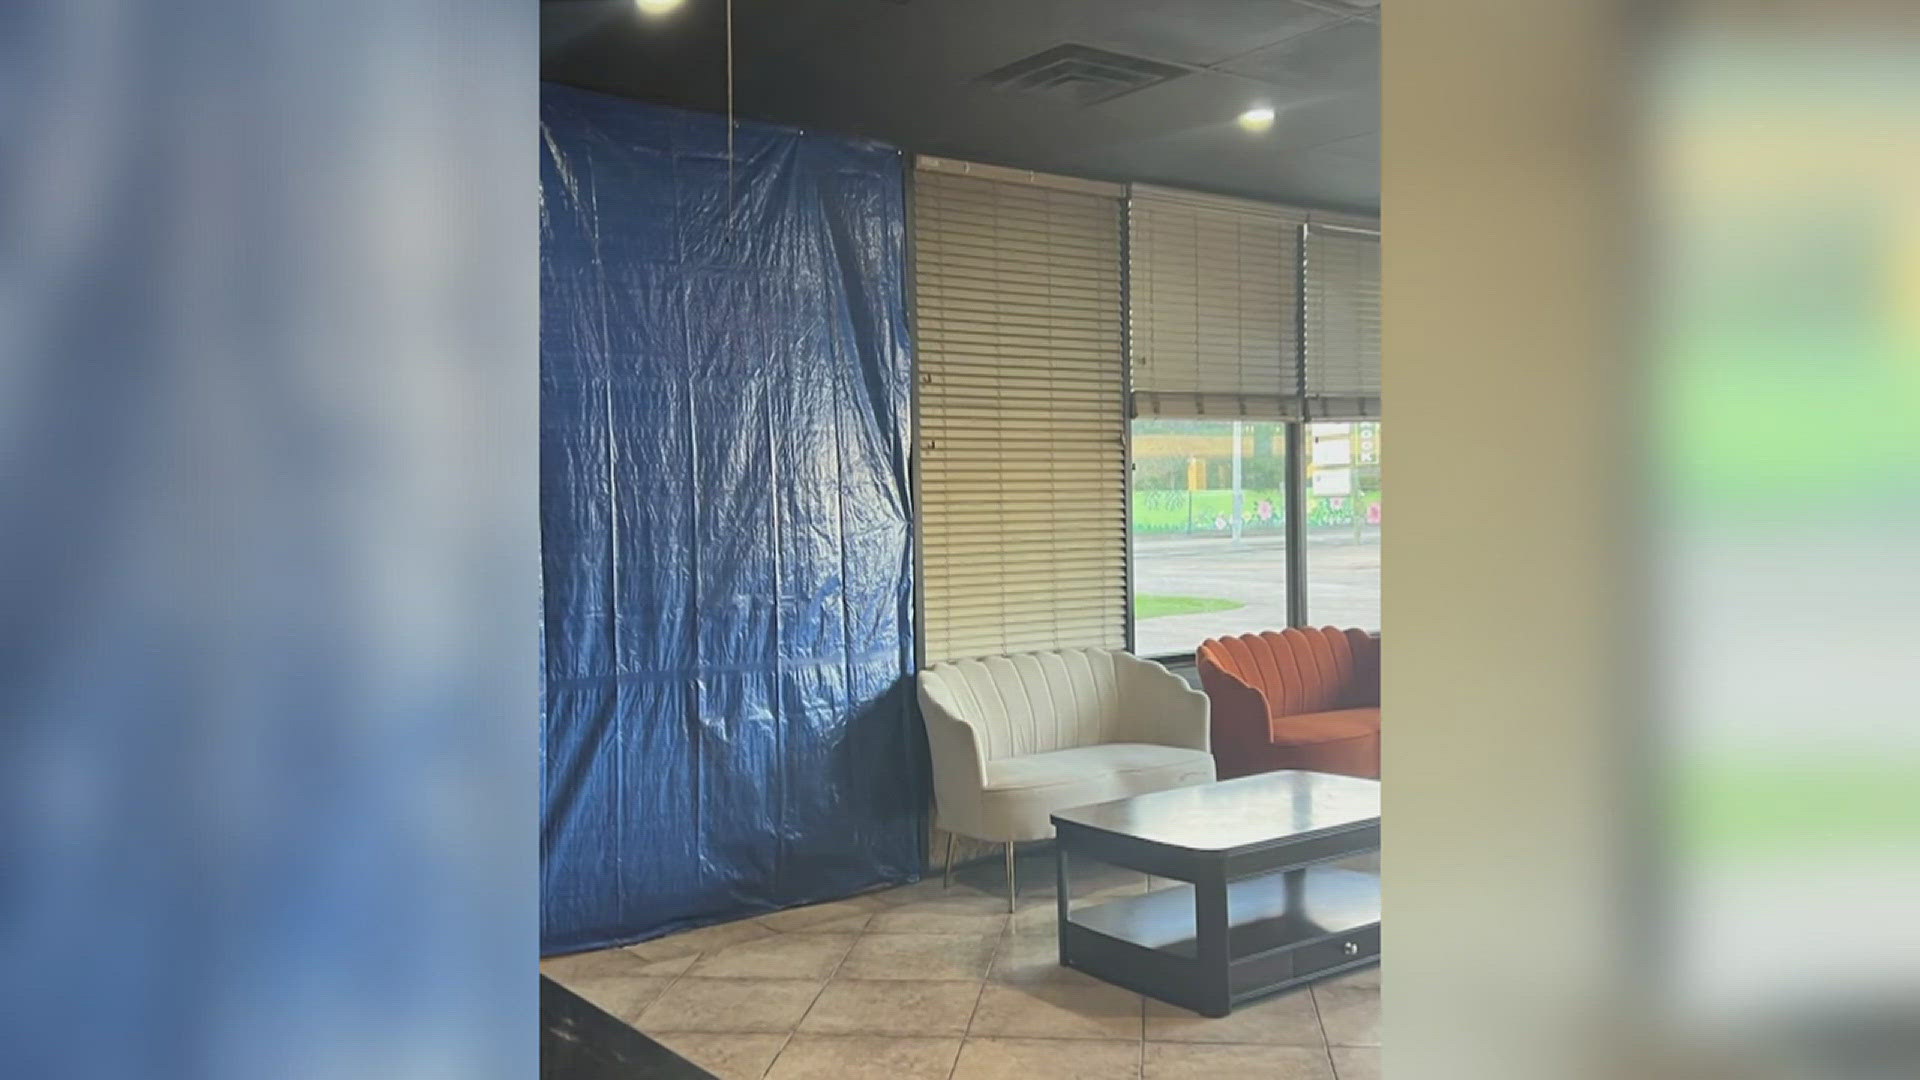 A reportedly intoxicated driver crashed into the restaurant, causing significant damage on June 16.